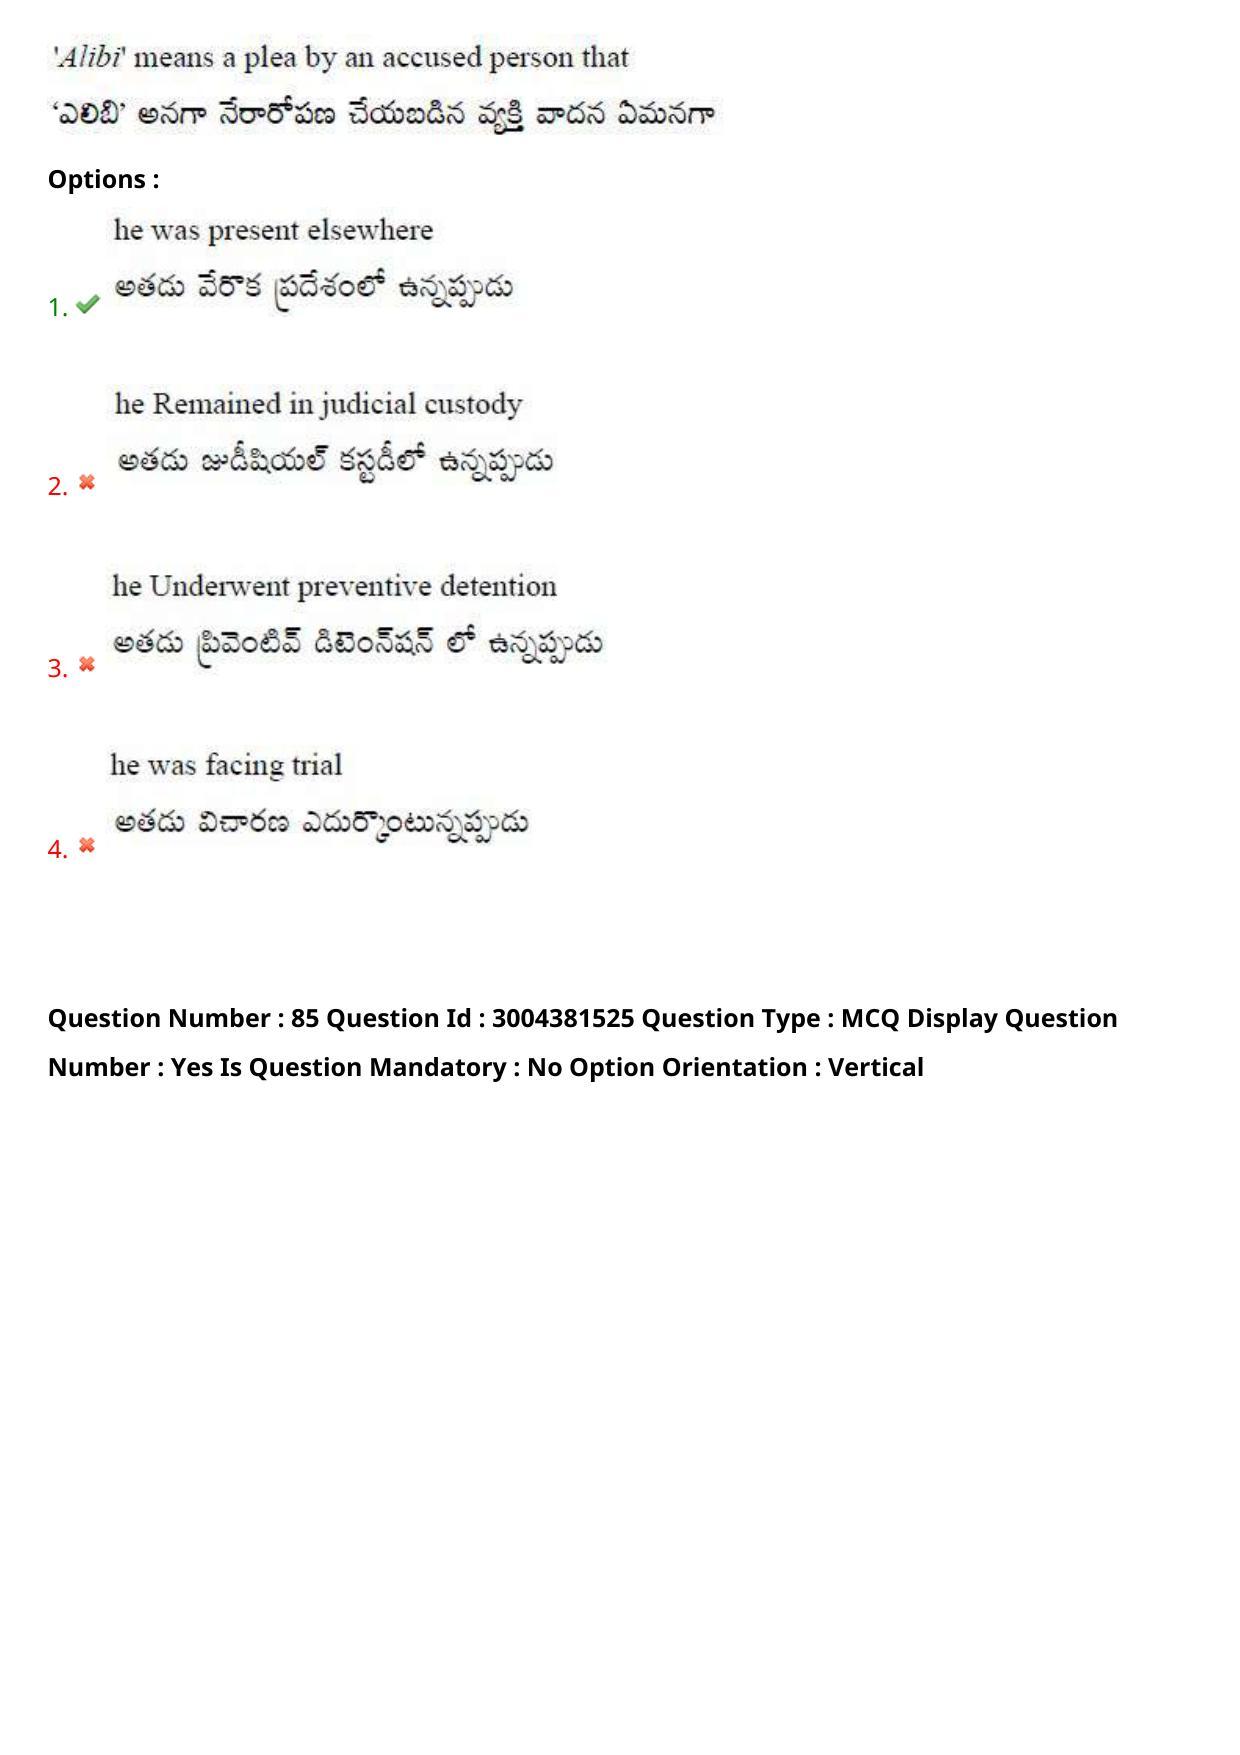 AP LAWCET 2020 - 3 Year LLB Question Paper With Keys - Page 55